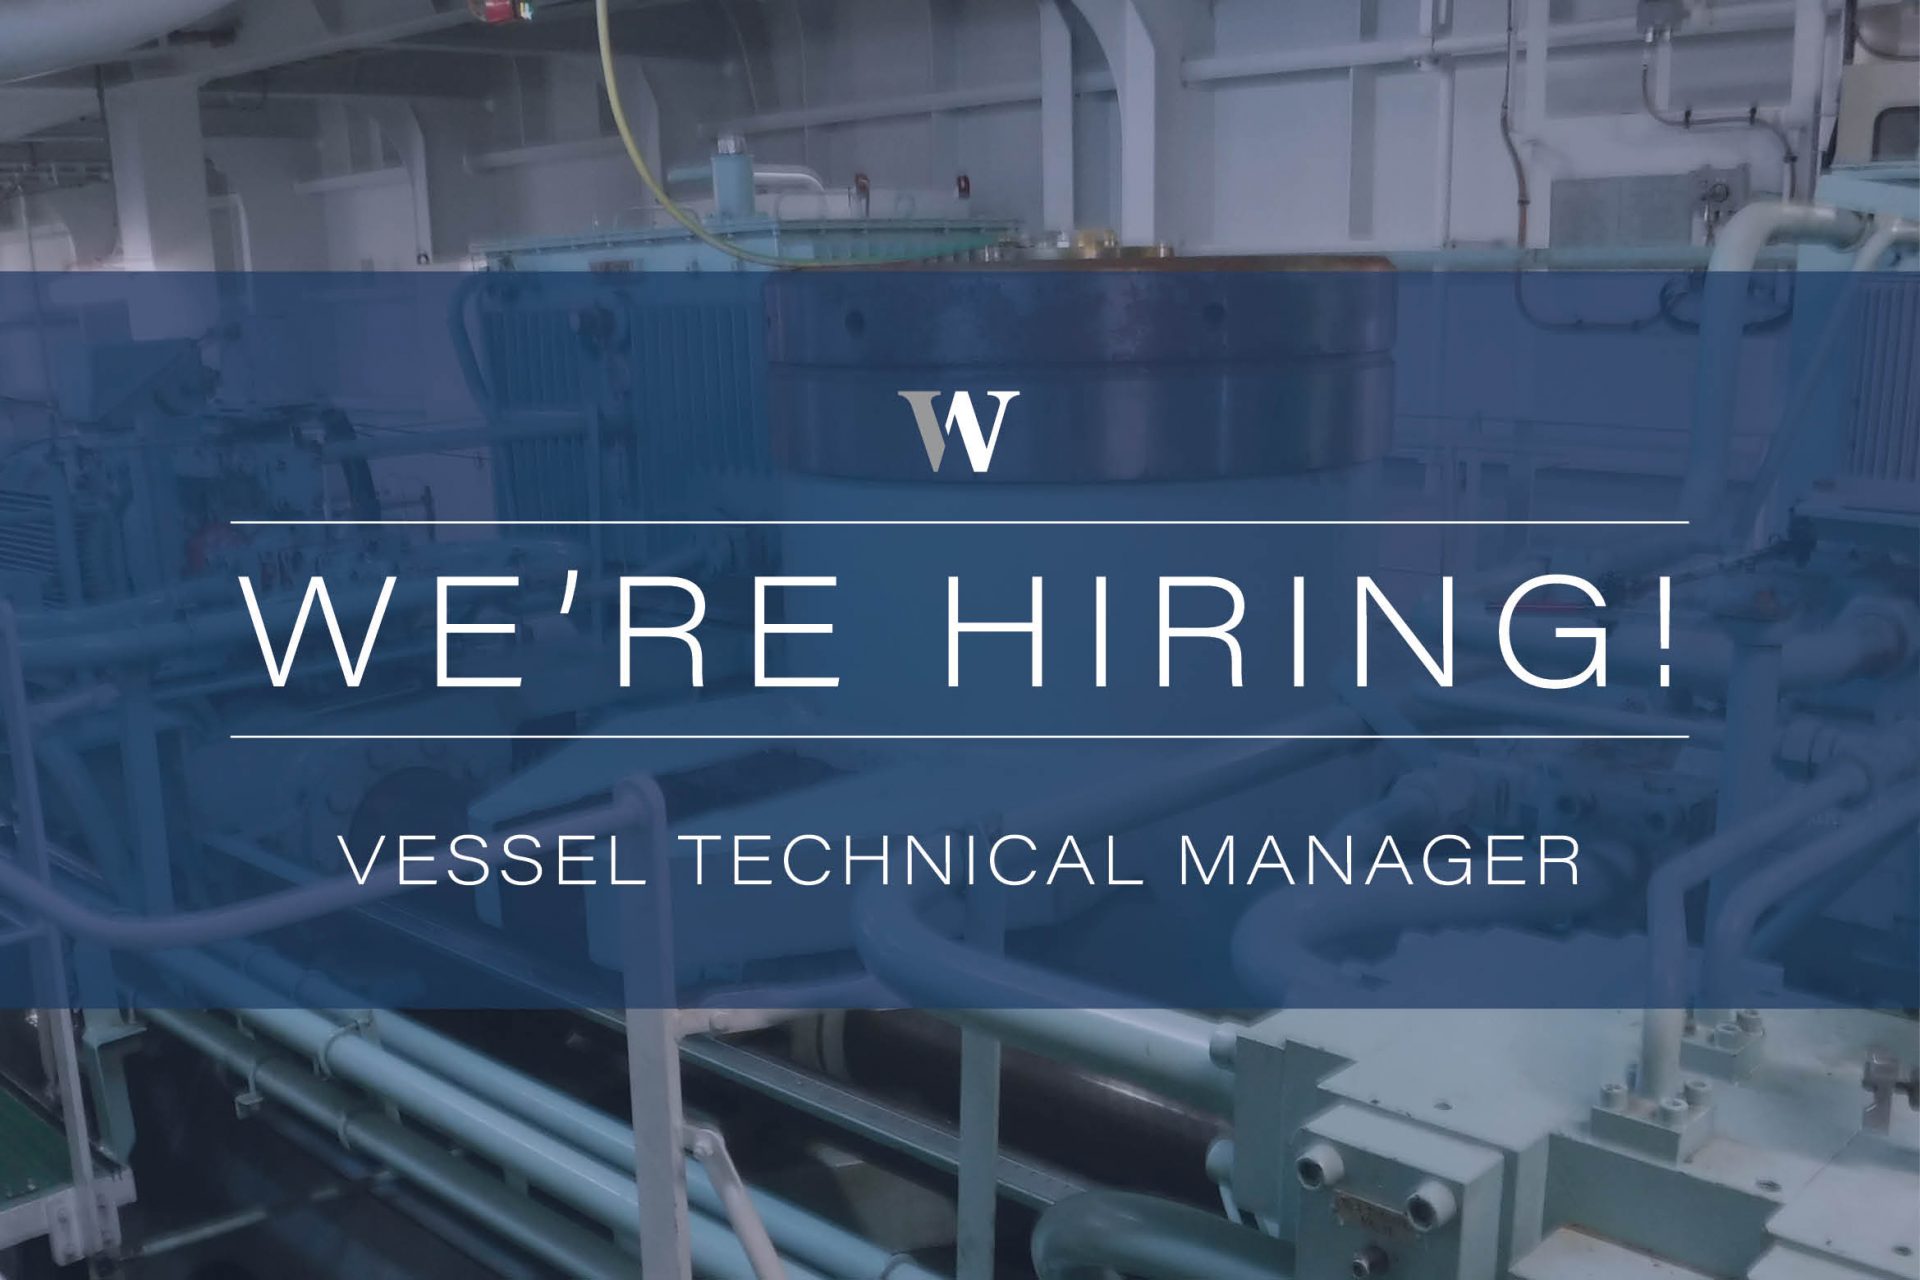 VESSEL TECHNICAL MANAGER